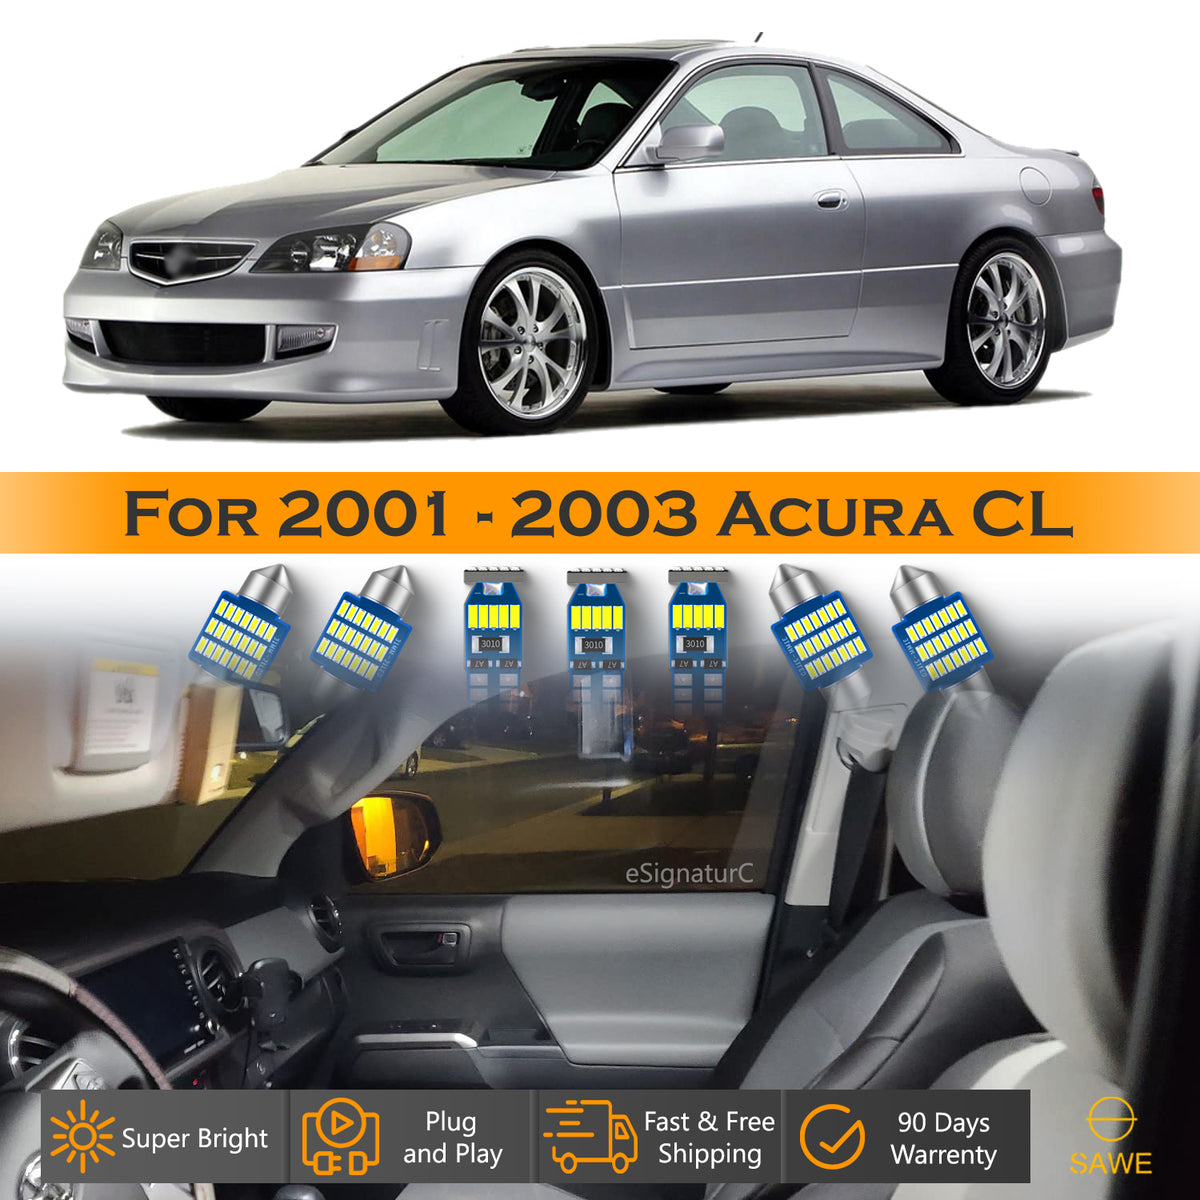 For Acura CL Interior LED Lights - Dome & Map Light Bulbs Package Kit for 2001 - 2003 - White